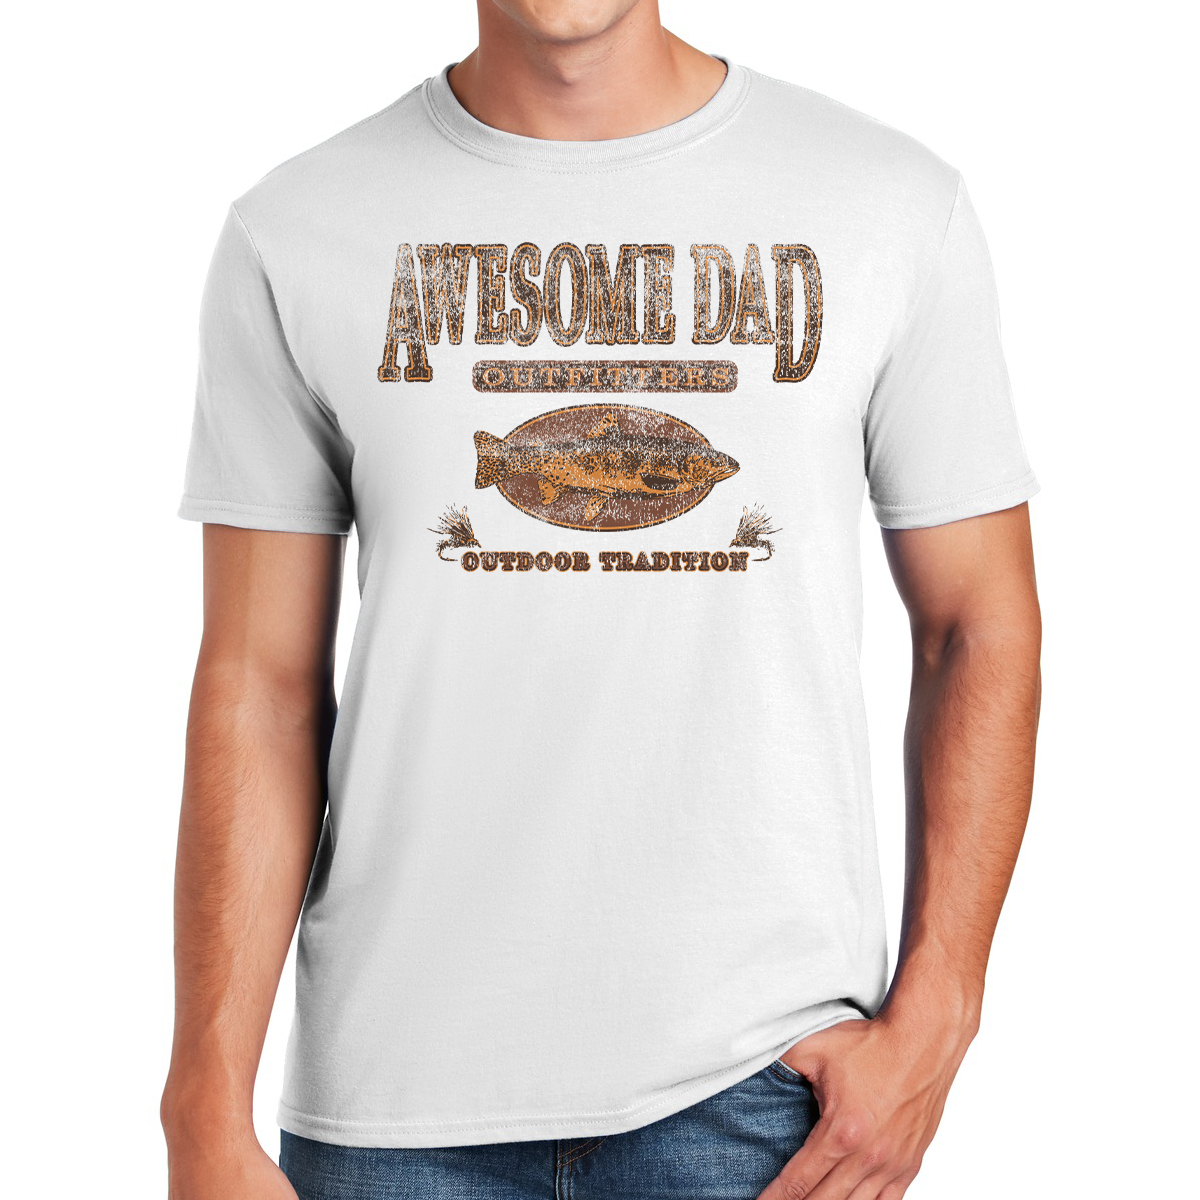 Awesome Dad Outfitters Tradition Fly Fishing Outdoor Tradition Nature T-shirt